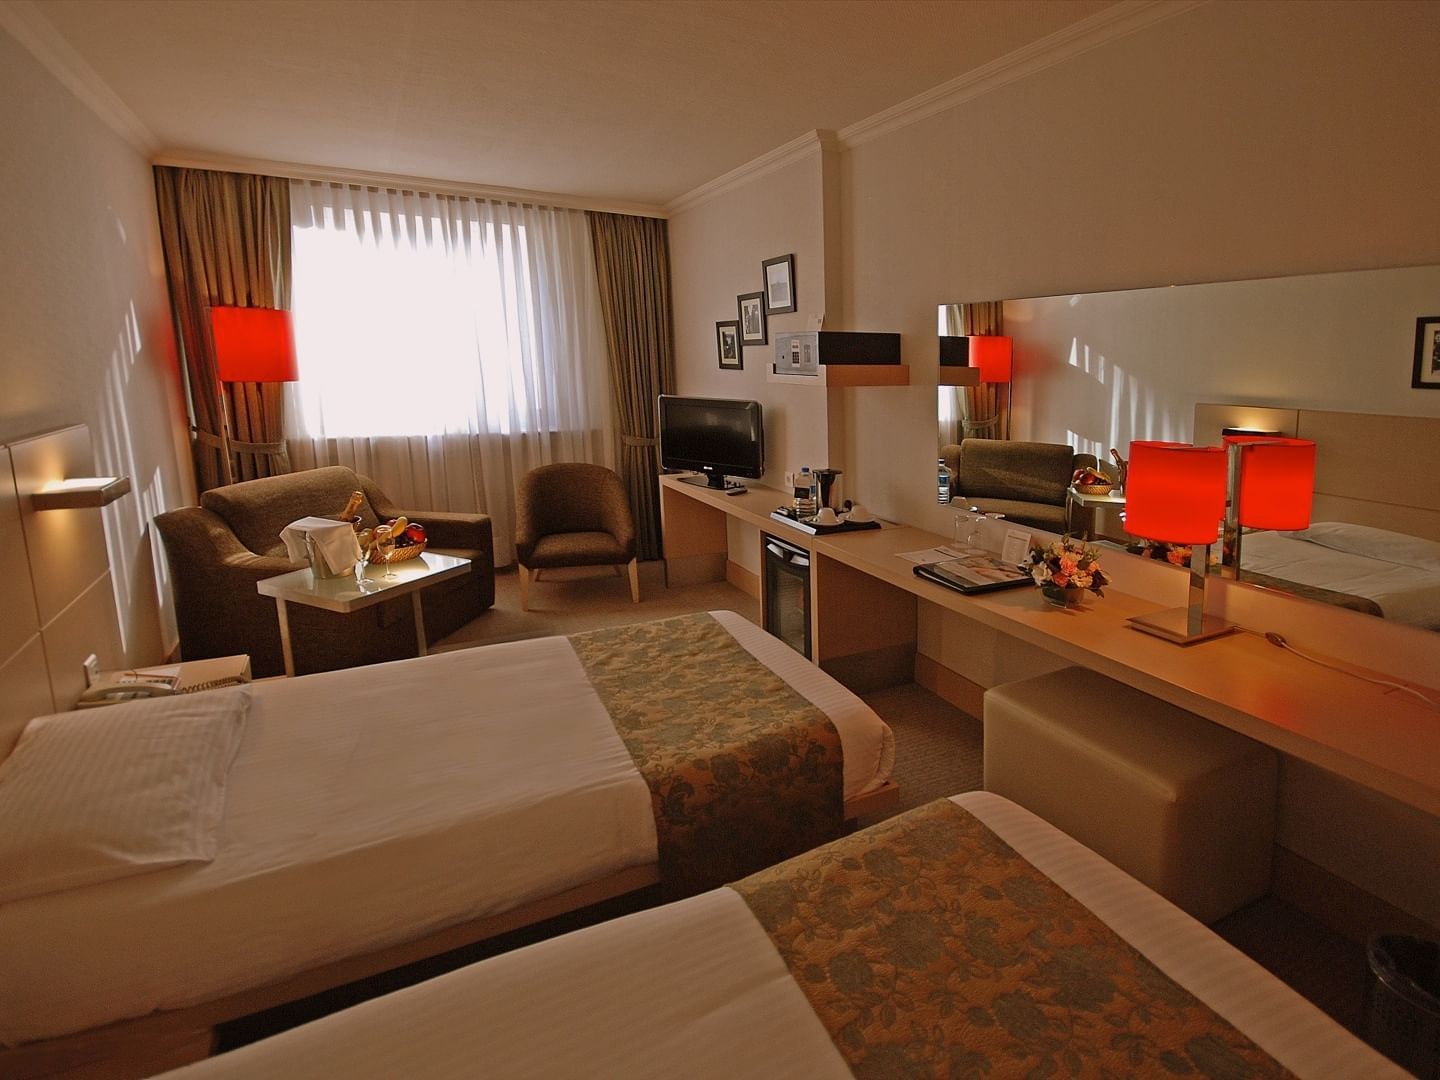 Bed room with a number of lamps at Eresin taxim premier.